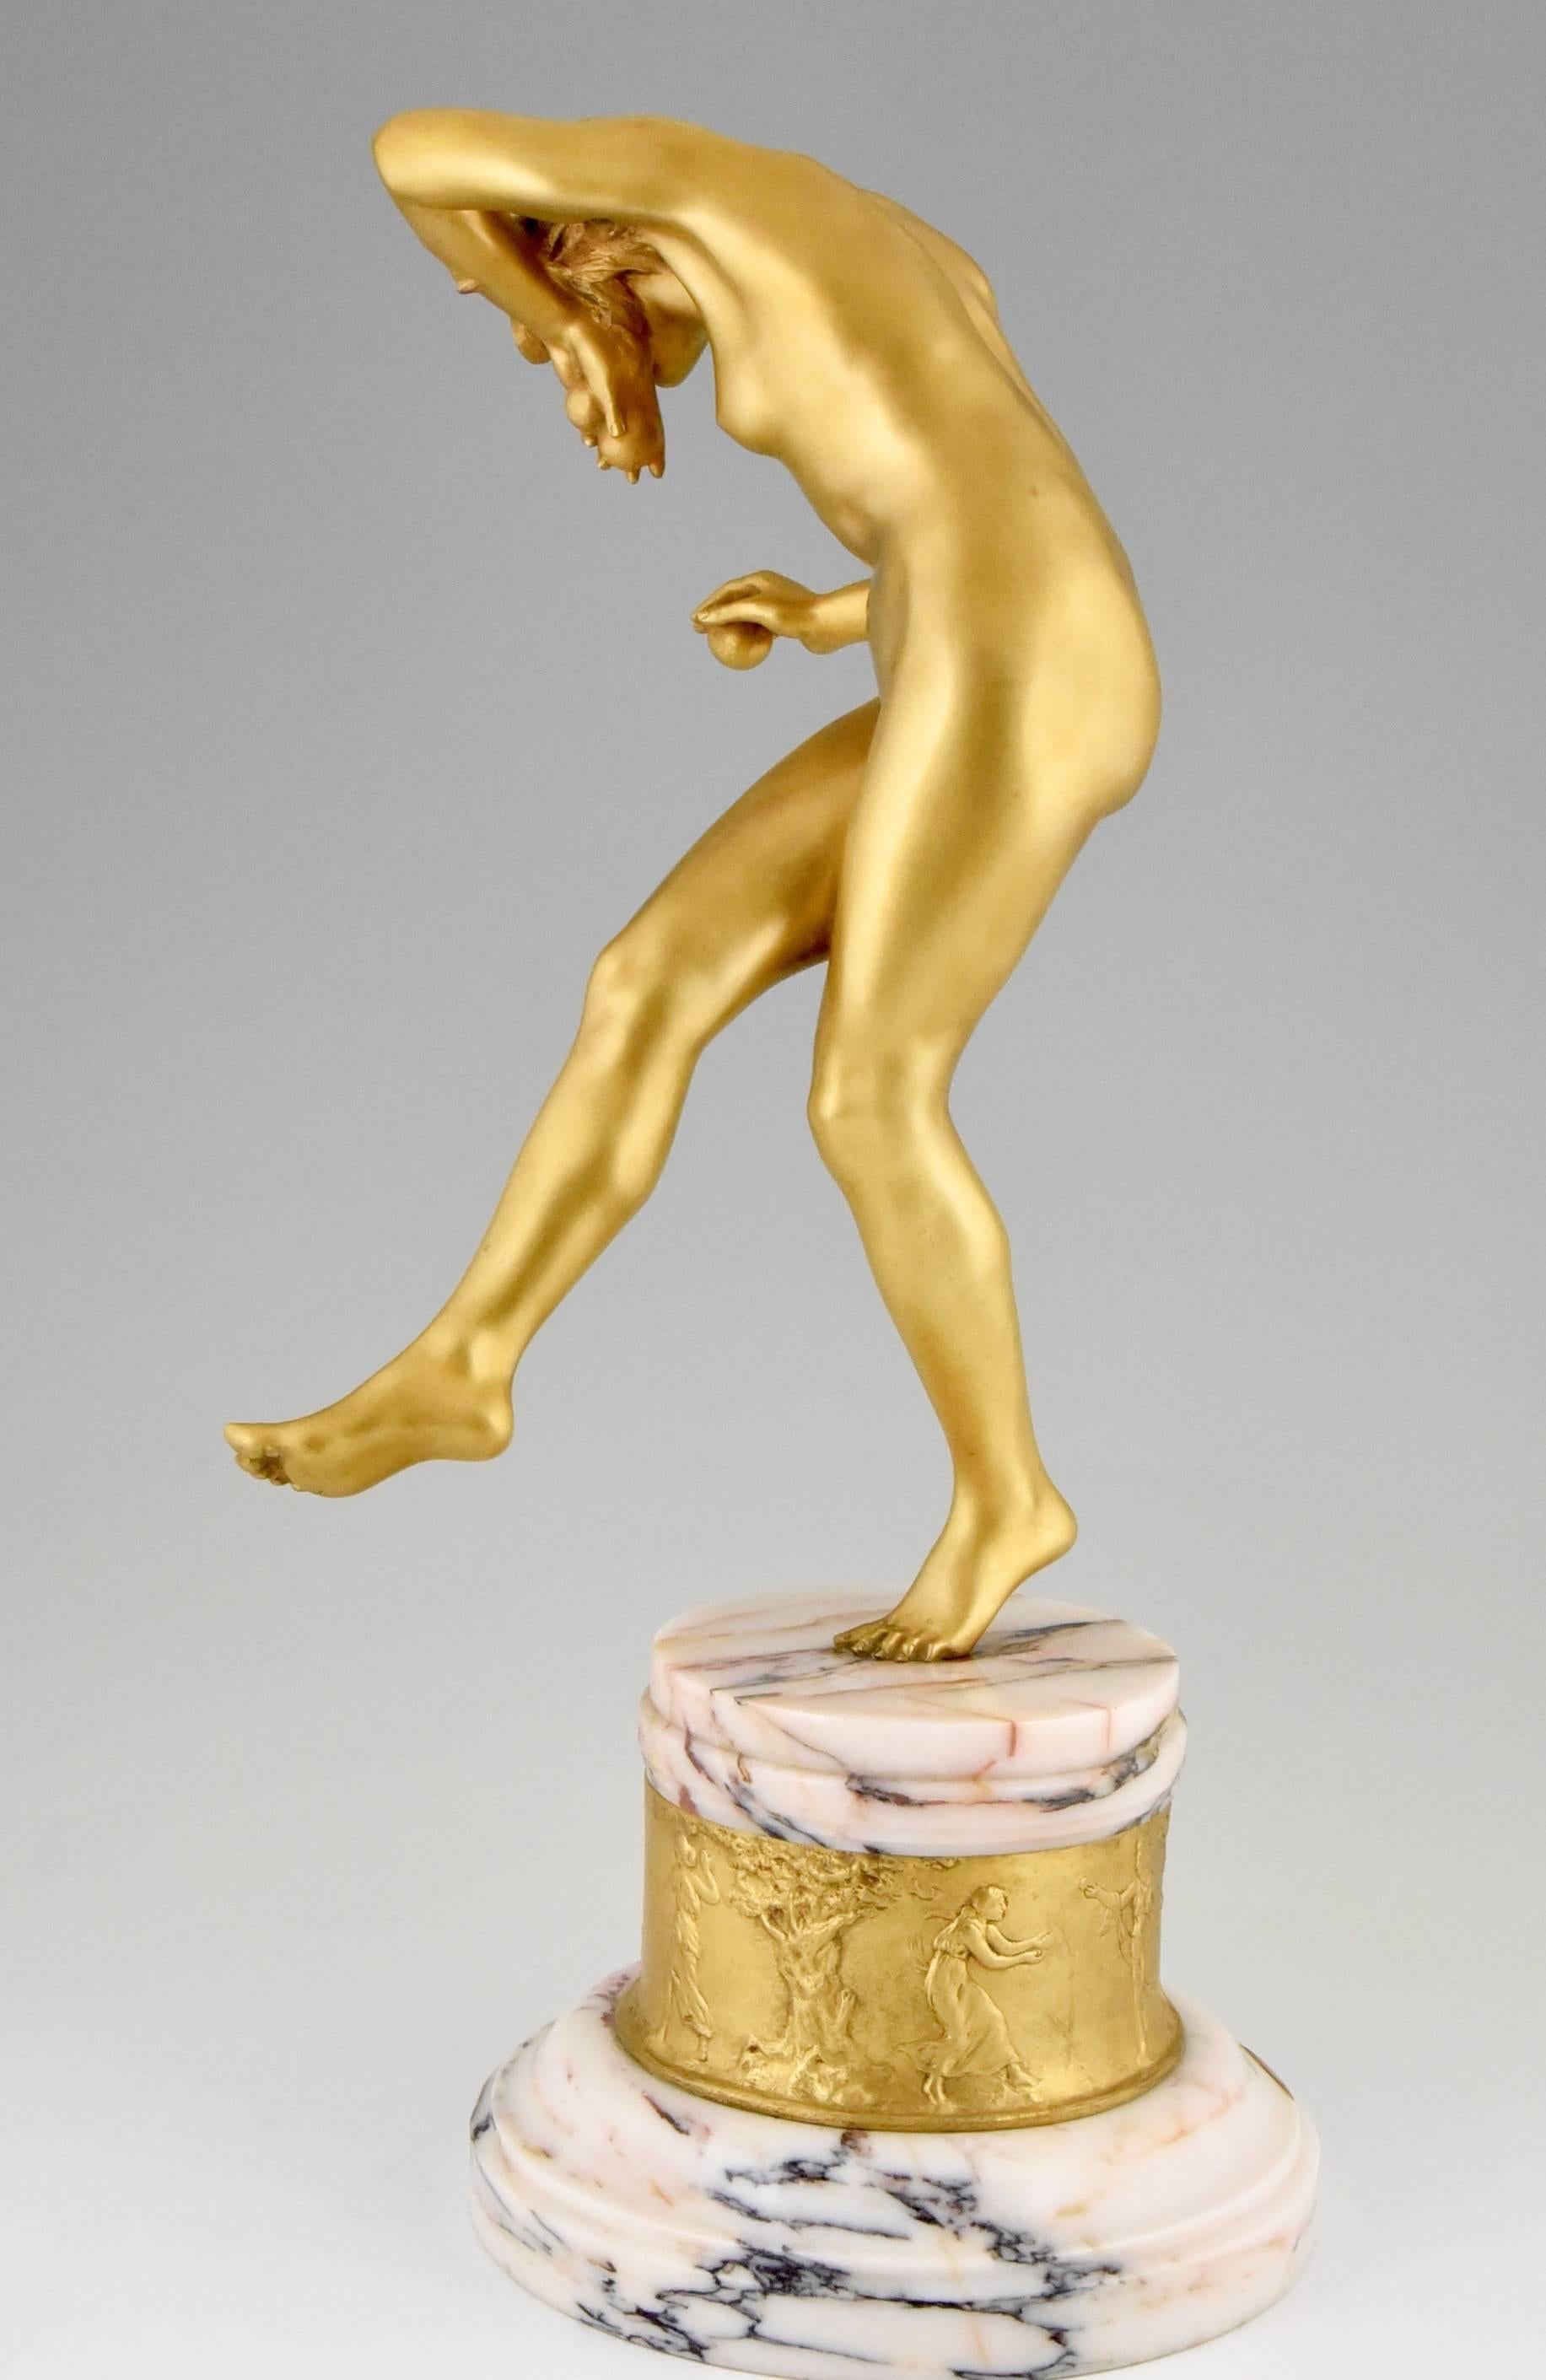 French Art Deco Gilt Bronze Sculpture Nude Dancer with Apple by Delapchier, 1920 France